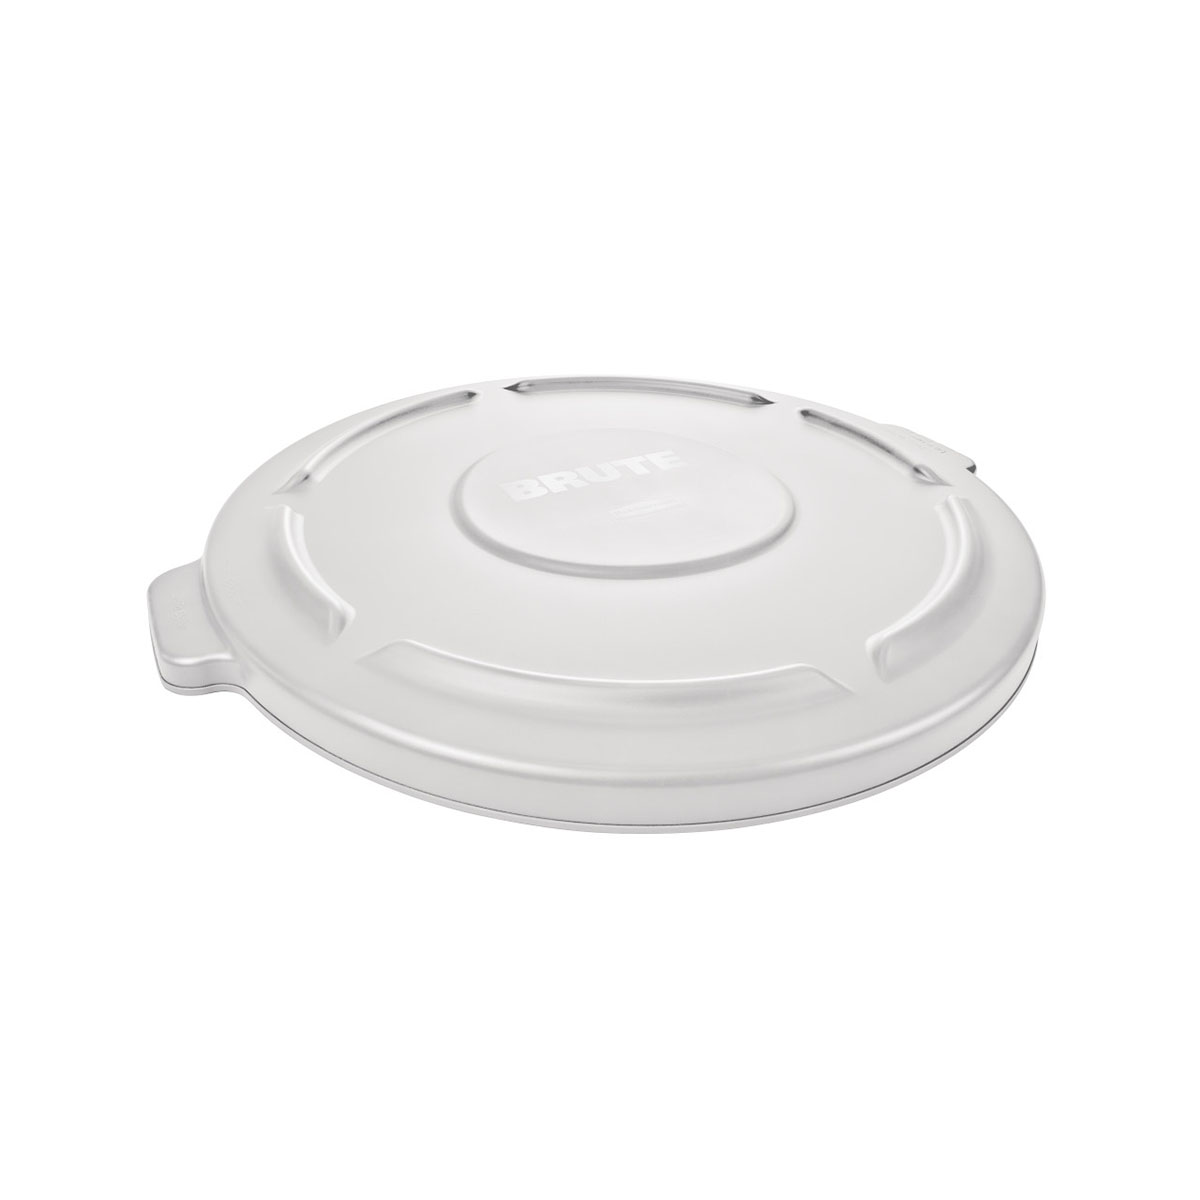 Rubbermaid Rubbermaid FG260900 Lid for Round Brute 10 Gallon Container  - White